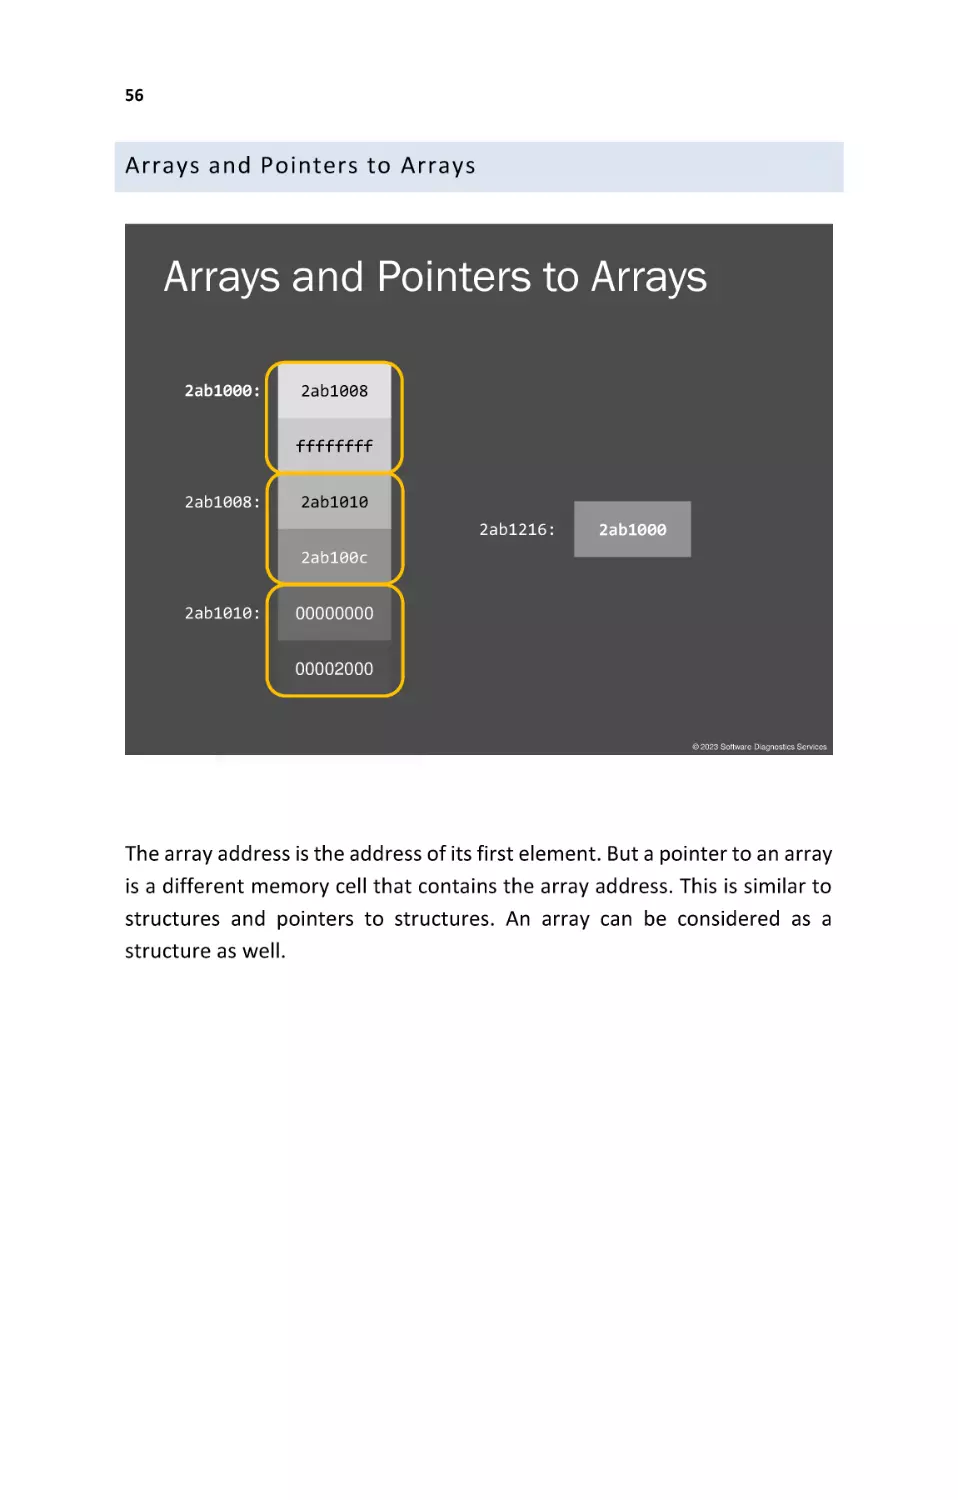 Arrays and Pointers to Arrays